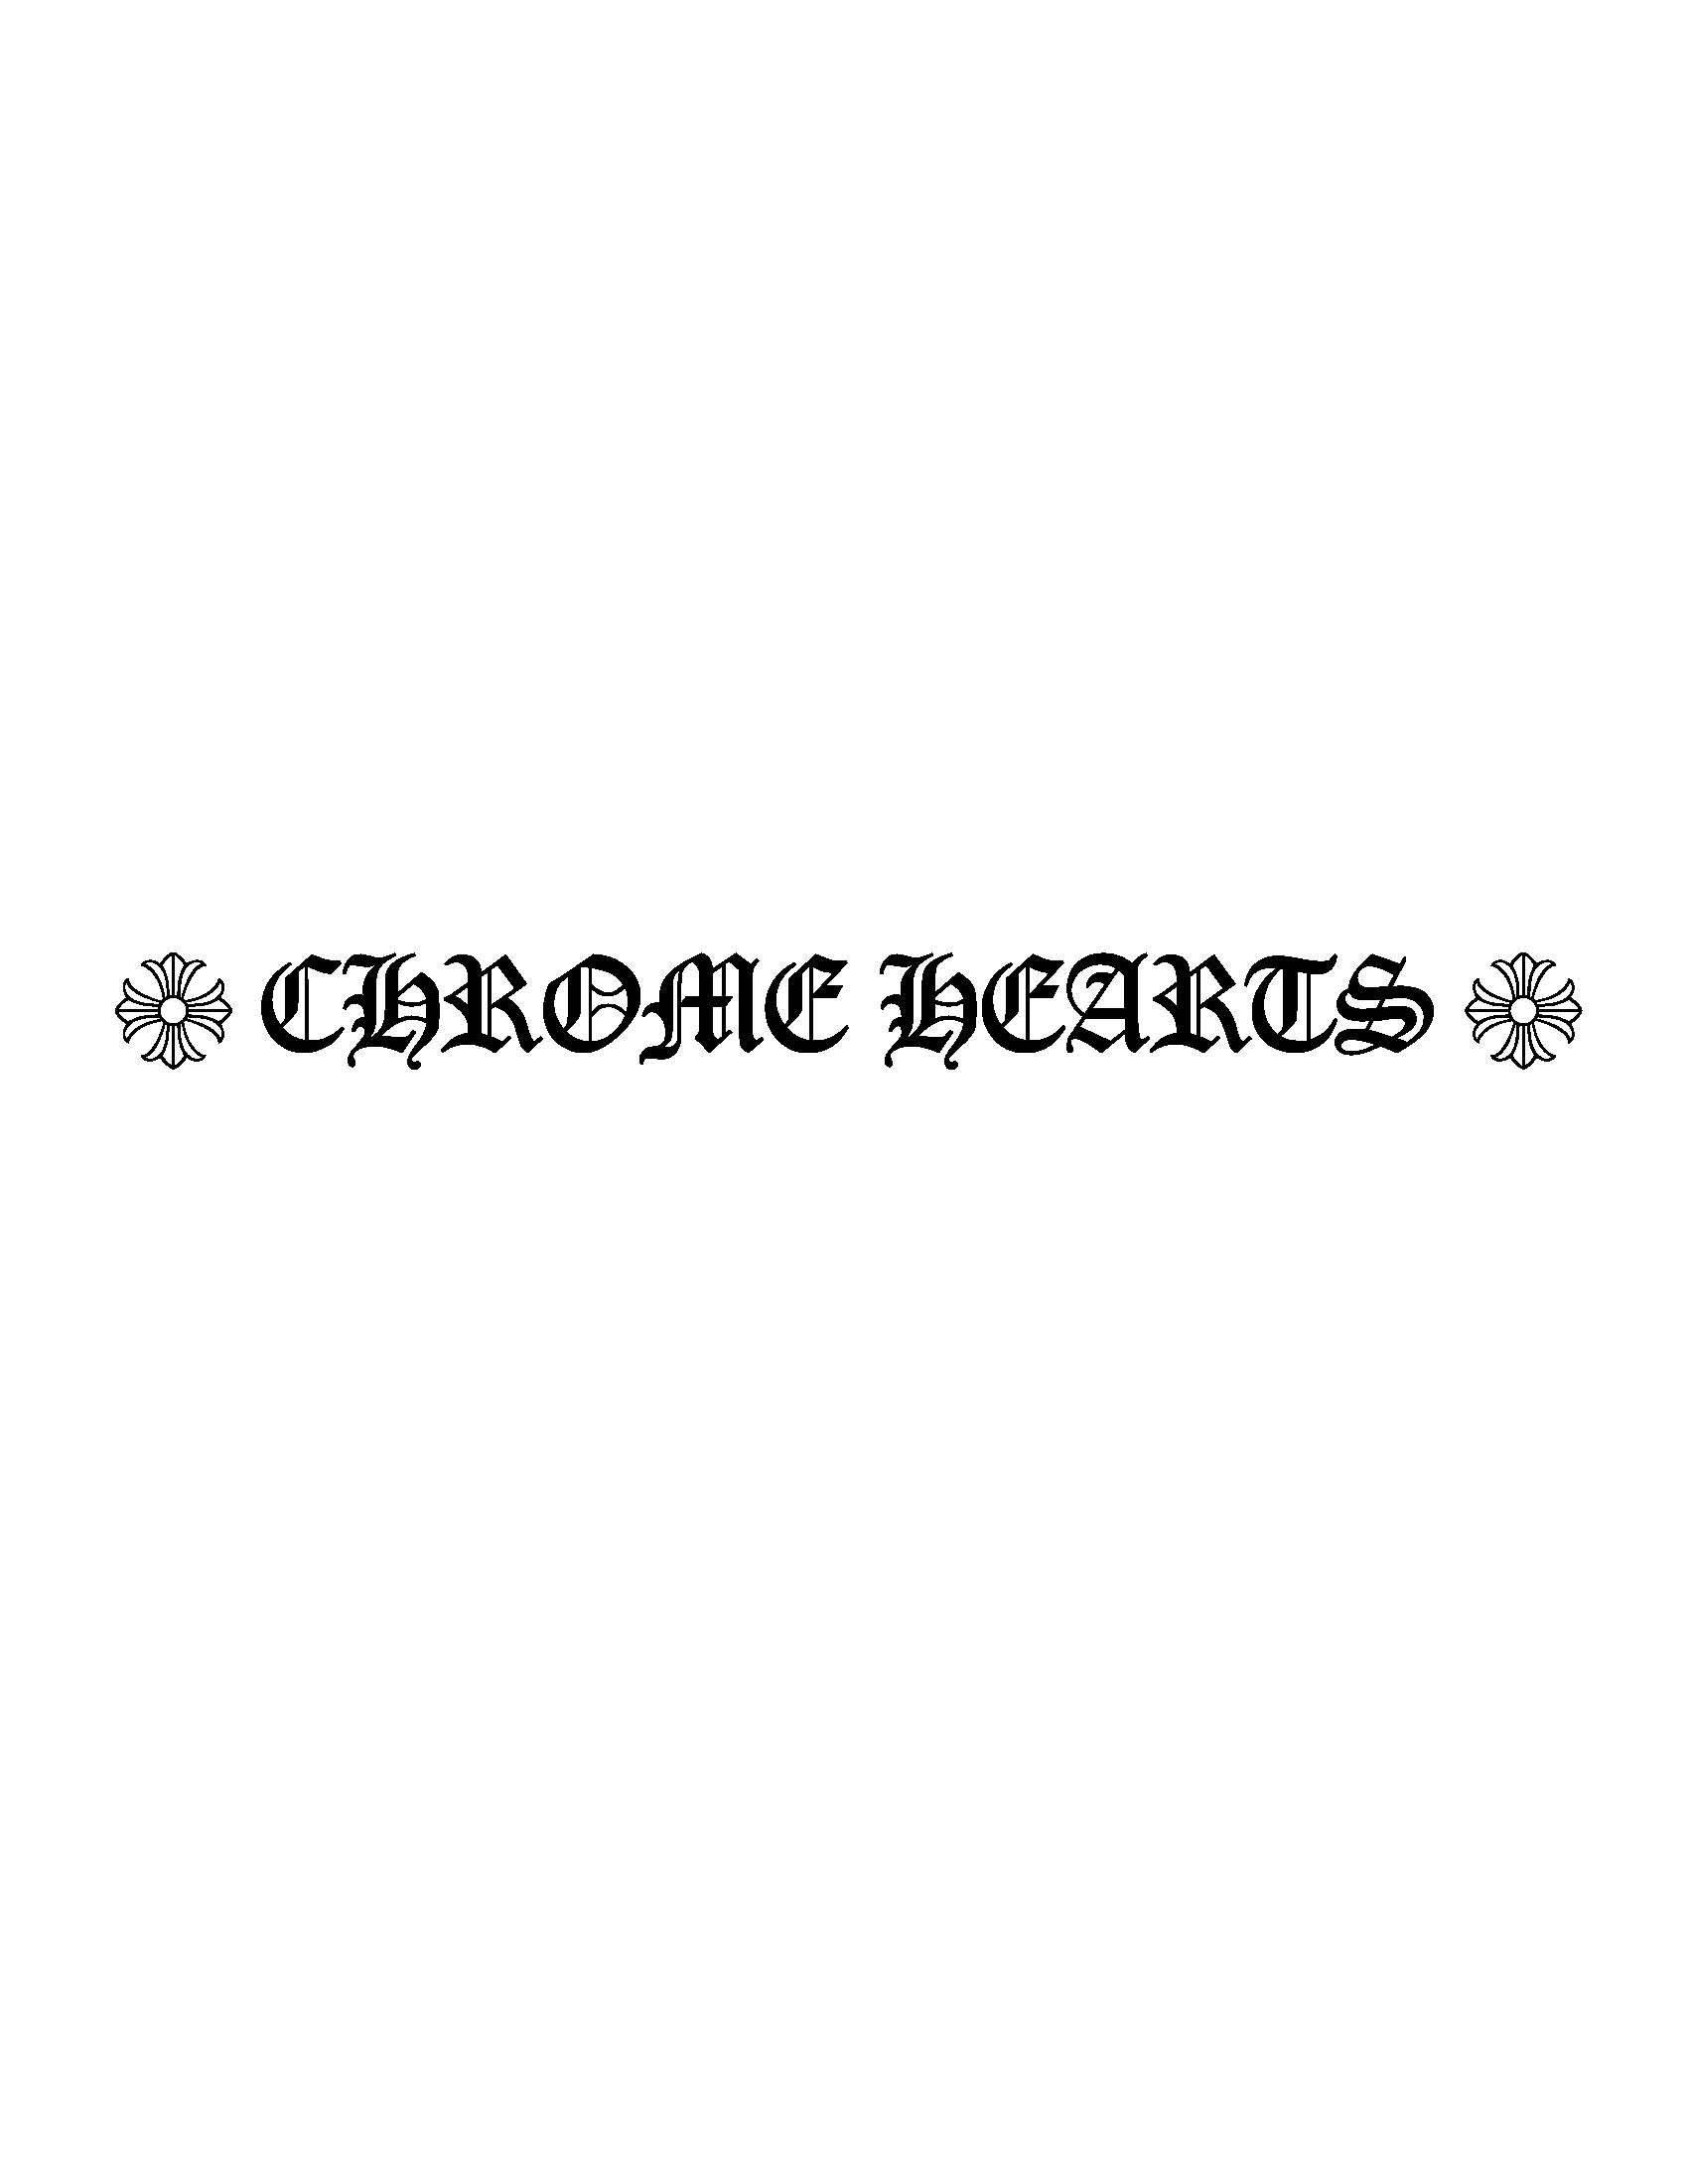 100+] Chrome Hearts Wallpapers